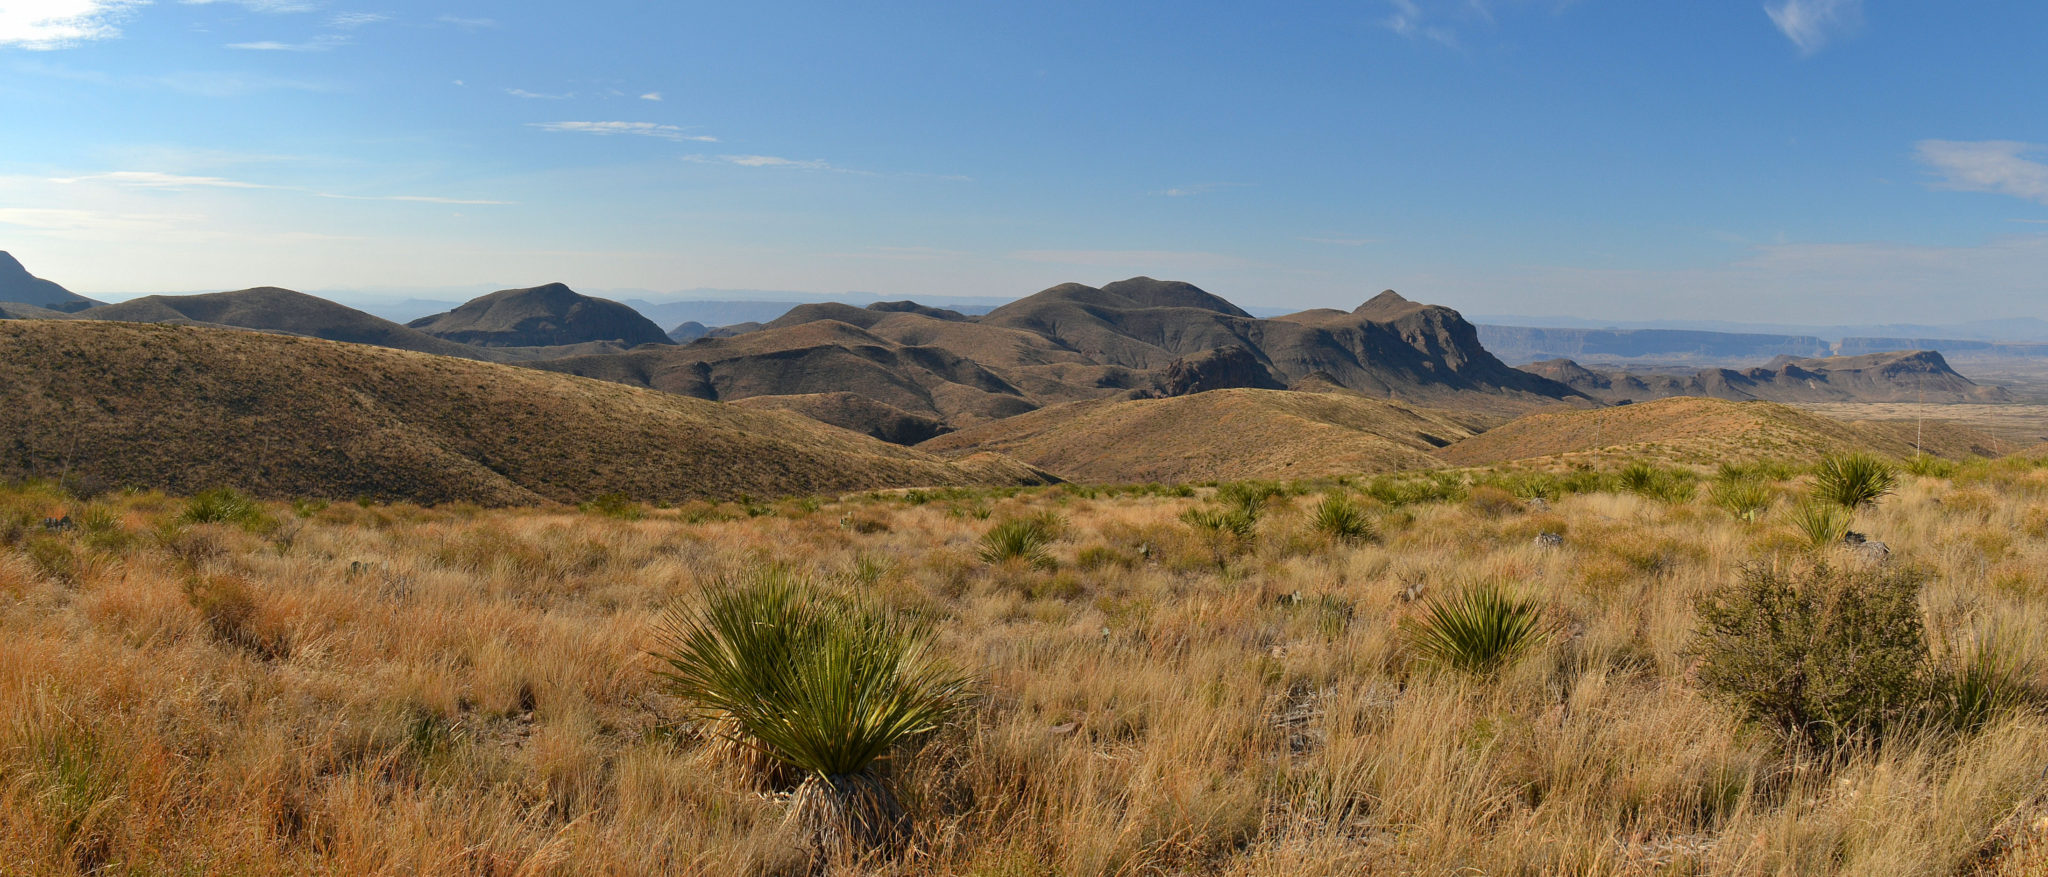 View from Sotol Vista in Big Bend